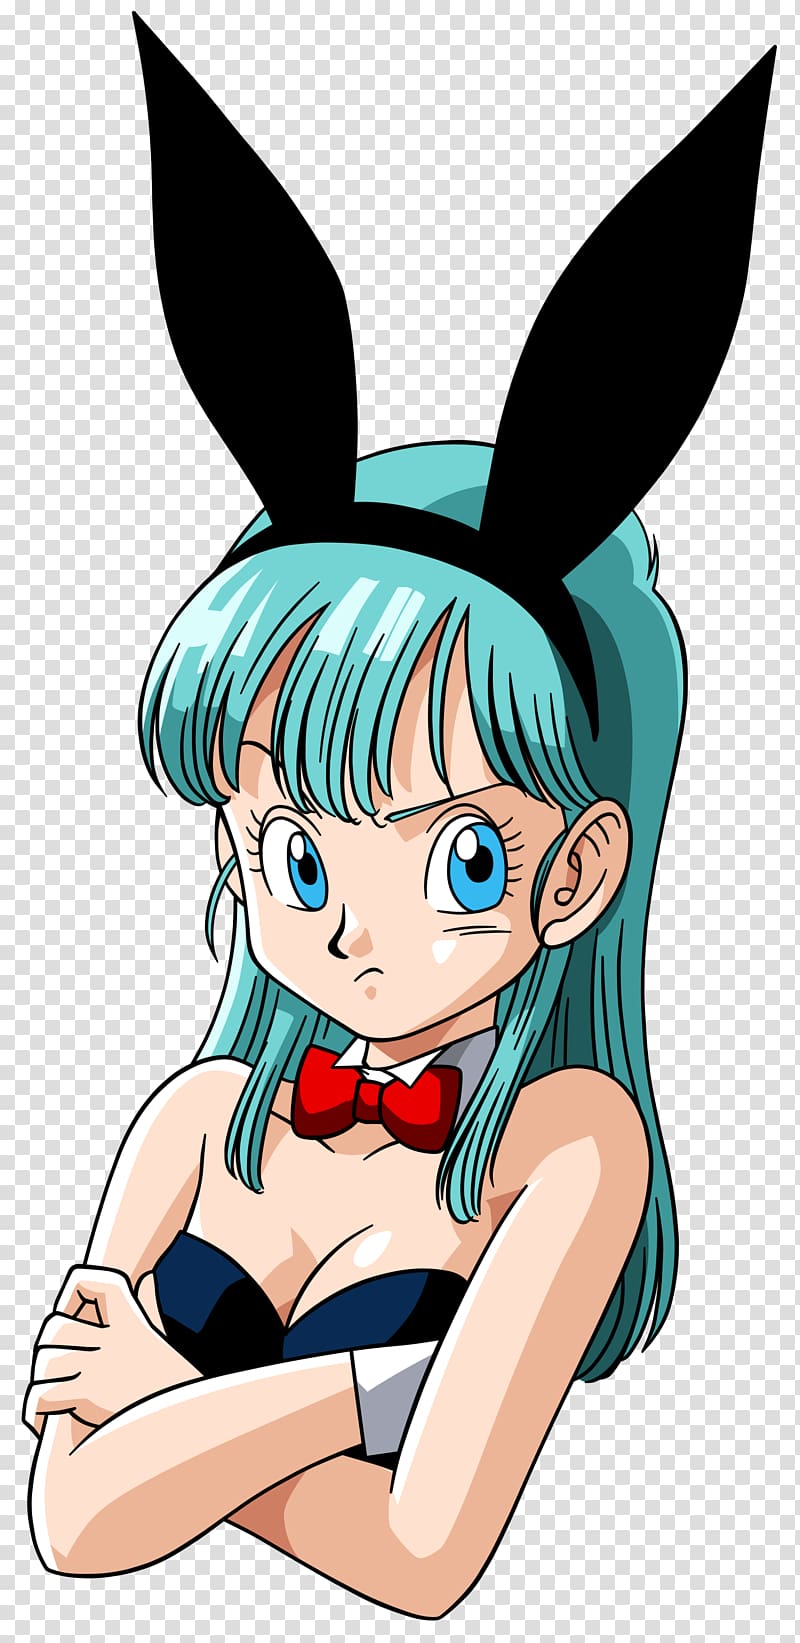 Dragonball Z Bulma , Bulma Android 18 Dragon Ball Costume Cosplay, bunny transparent background PNG clipart